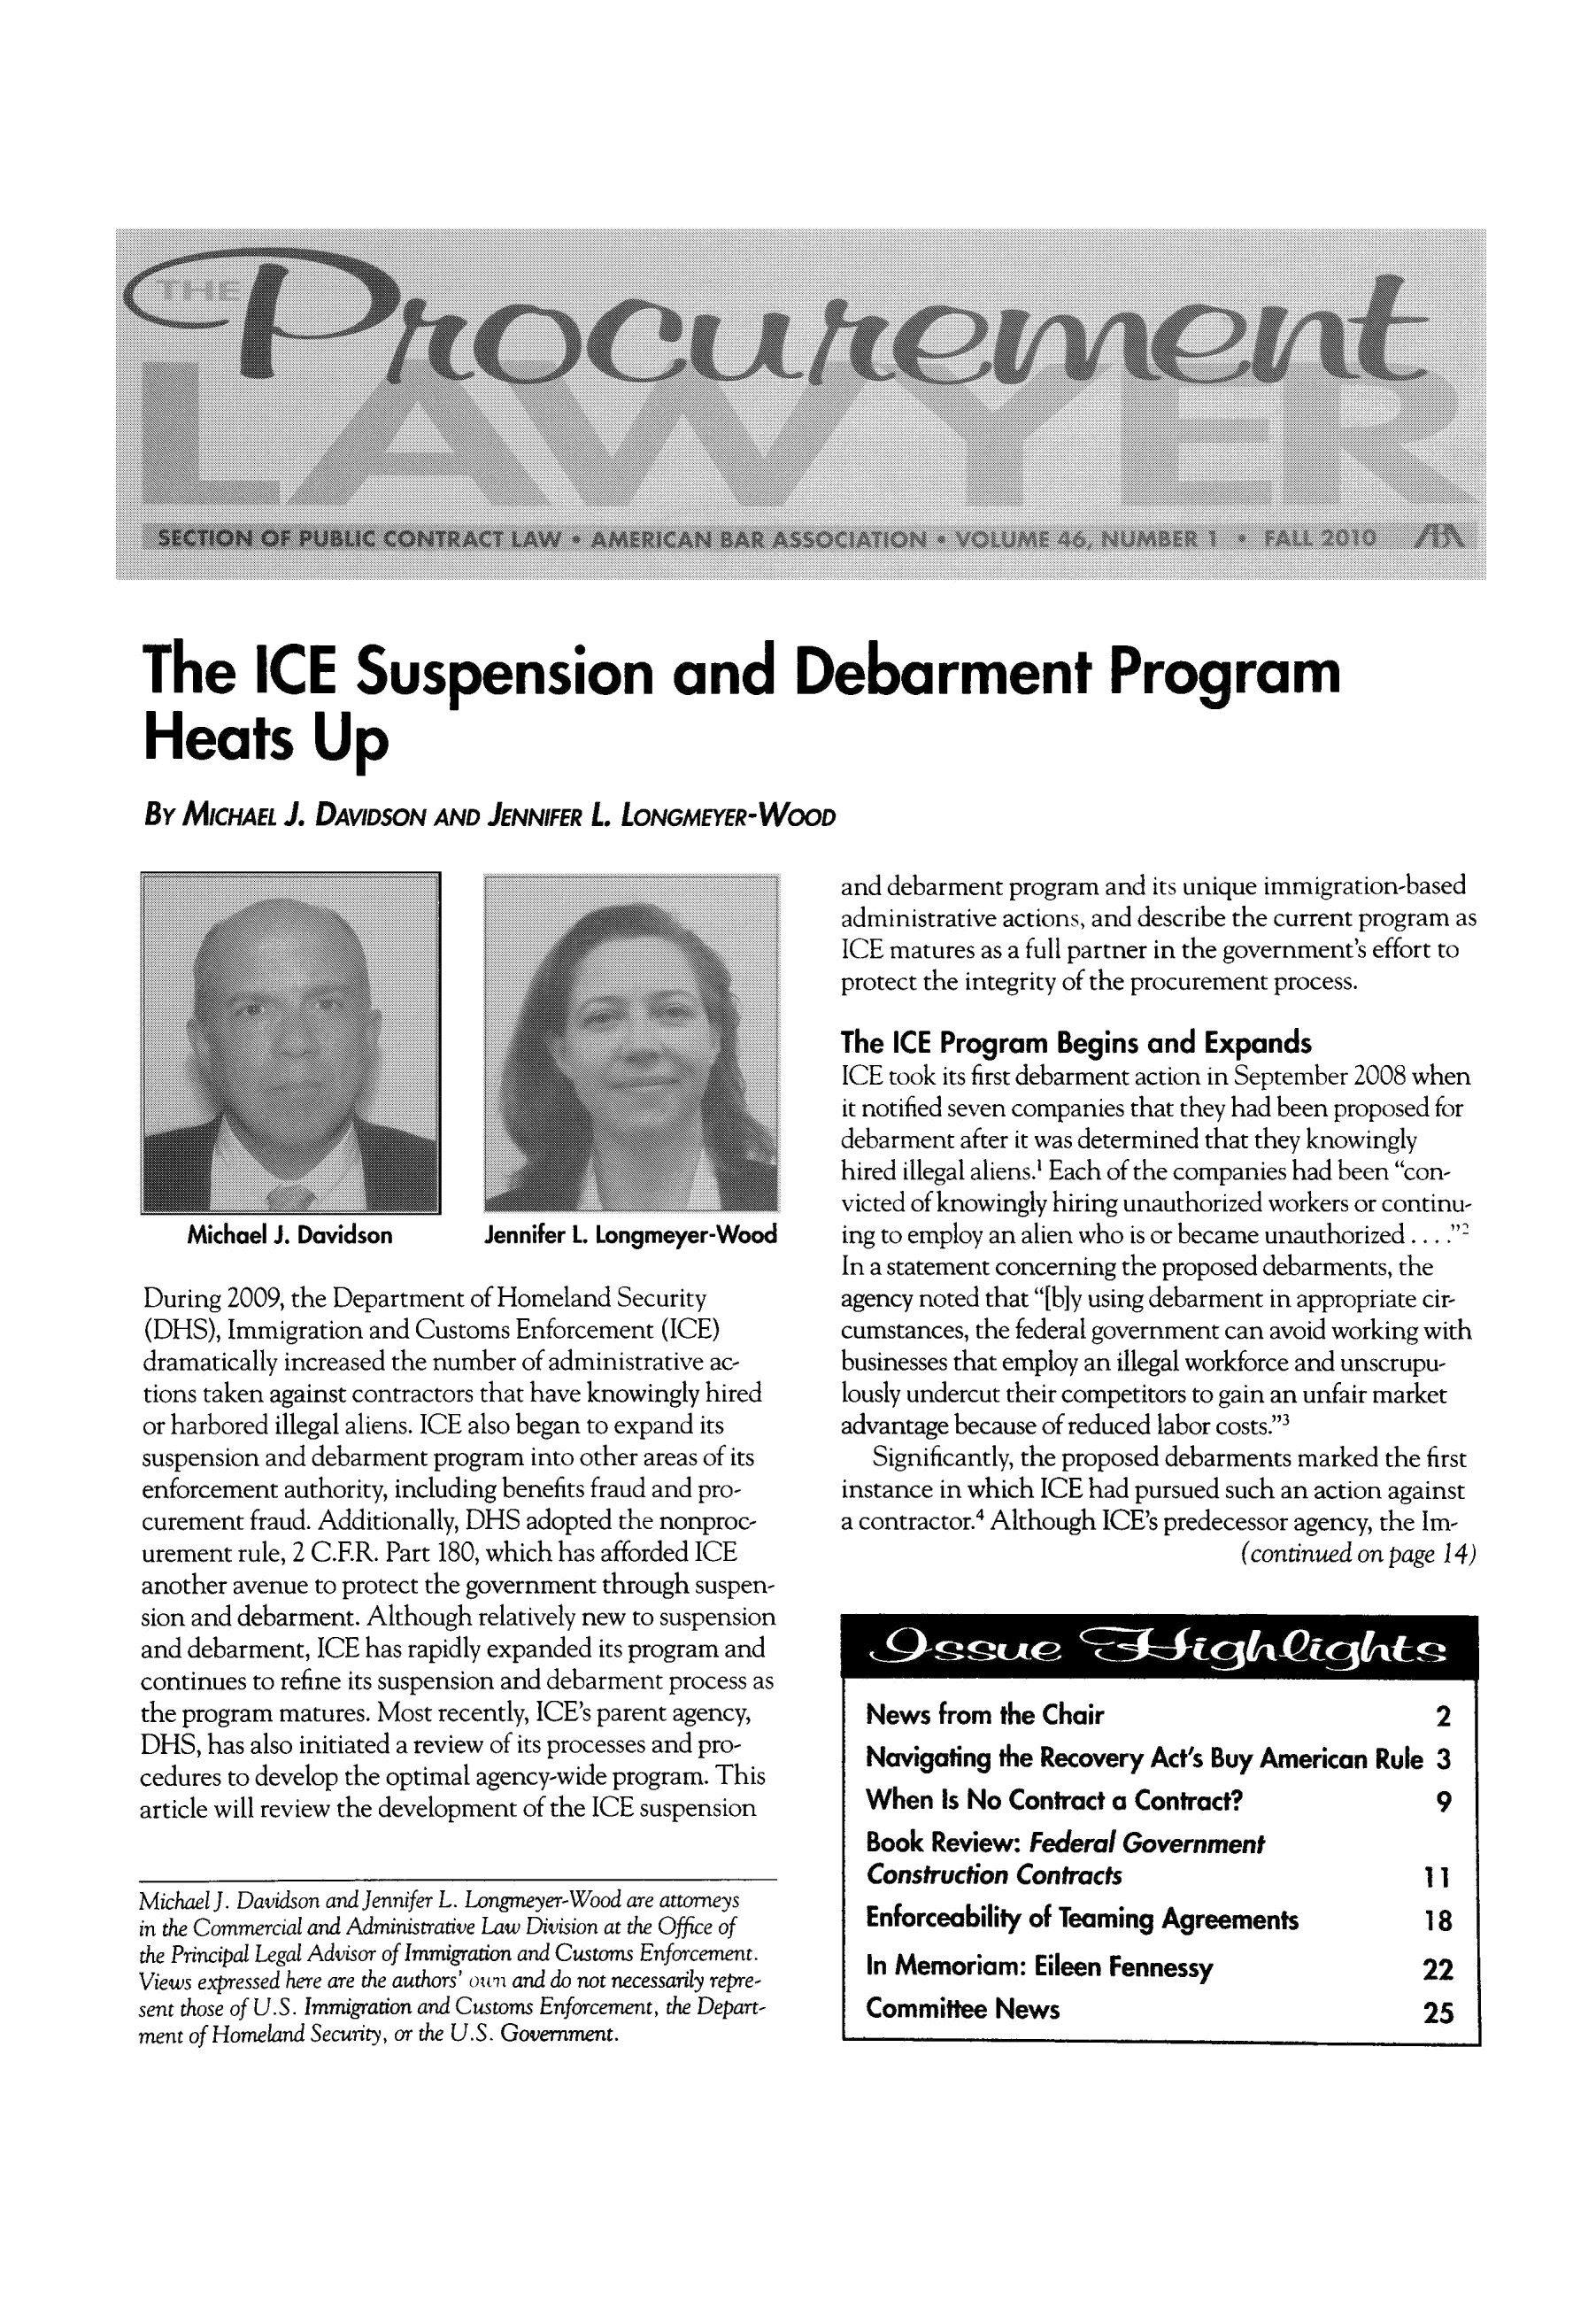 handle is hein.journals/procurlw46 and id is 1 raw text is: The ICE Suspension and Debarment Program
Heats Up
By MICHAEL J. DAVIDSON AND JENNIFER L. LONGMEYER-WOOD

Jennifer L. Longmeyer-Wood

During 2009, the Department of Homeland Security
(DHS), Immigration and Customs Enforcement (ICE)
dramatically increased the number of administrative ac-
tions taken against contractors that have knowingly hired
or harbored illegal aliens. ICE also began to expand its
suspension and debarment program into other areas of its
enforcement authority, including benefits fraud and pro-
curement fraud. Additionally, DHS adopted the nonproc-
urement rule, 2 C.F.R. Part 180, which has afforded ICE
another avenue to protect the government through suspen-
sion and debarment. Although relatively new to suspension
and debarment, ICE has rapidly expanded its program and
continues to refine its suspension and debarment process as
the program matures. Most recently, ICE's parent agency,
DHS, has also initiated a review of its processes and pro-
cedures to develop the optimal agency-wide program. This
article will review the development of the ICE suspension
Michael J. Davidson and Jennifer L. Longmeyer-Wood are attorneys
in the Commercial and Administrative Law Division at the Office of
the Principal Legal Advisor of Immigration and Customs Enforcement.
Views expressed here are the authors' ouiand do not necessarily repre-
sent those of U.S. Immigration and Customs Enforcement, the Depart-
ment of Homeland Security, or the U.S. Government.

and debarment program and its unique immigration-based
administrative actions, and describe the current program as
ICE matures as a full partner in the government's effort to
protect the integrity of the procurement process.
The ICE Program Begins and Expands
ICE took its first debarment action in September 2008 when
it notified seven companies that they had been proposed for
debarment after it was determined that they knowingly
hired illegal aliens.' Each of the companies had been con-
victed of knowingly hiring unauthorized workers or continu-
ing to employ an alien who is or became unauthorized...
In a statement concerning the proposed debarments, the
agency noted that [bly using debarment in appropriate cir-
cumstances, the federal government can avoid working with
businesses that employ an illegal workforce and unscrupu-
lously undercut their competitors to gain an unfair market
advantage because of reduced labor costs.3
Significantly, the proposed debarments marked the first
instance in which ICE had pursued such an action against
a contractor.4 Although ICE's predecessor agency, the Im-
(continued on page 14)
News from the Chair                         2
Navigating the Recovery Act's Buy American Rule 3
When Is No Contract a Contract?             9
Book Review: Federal Government
Construction Contracts                     1
Enforceability of Teaming Agreements       18
In Memoriam: Eileen Fennessy               22
Committee News                             25

Michael J. Davidson


